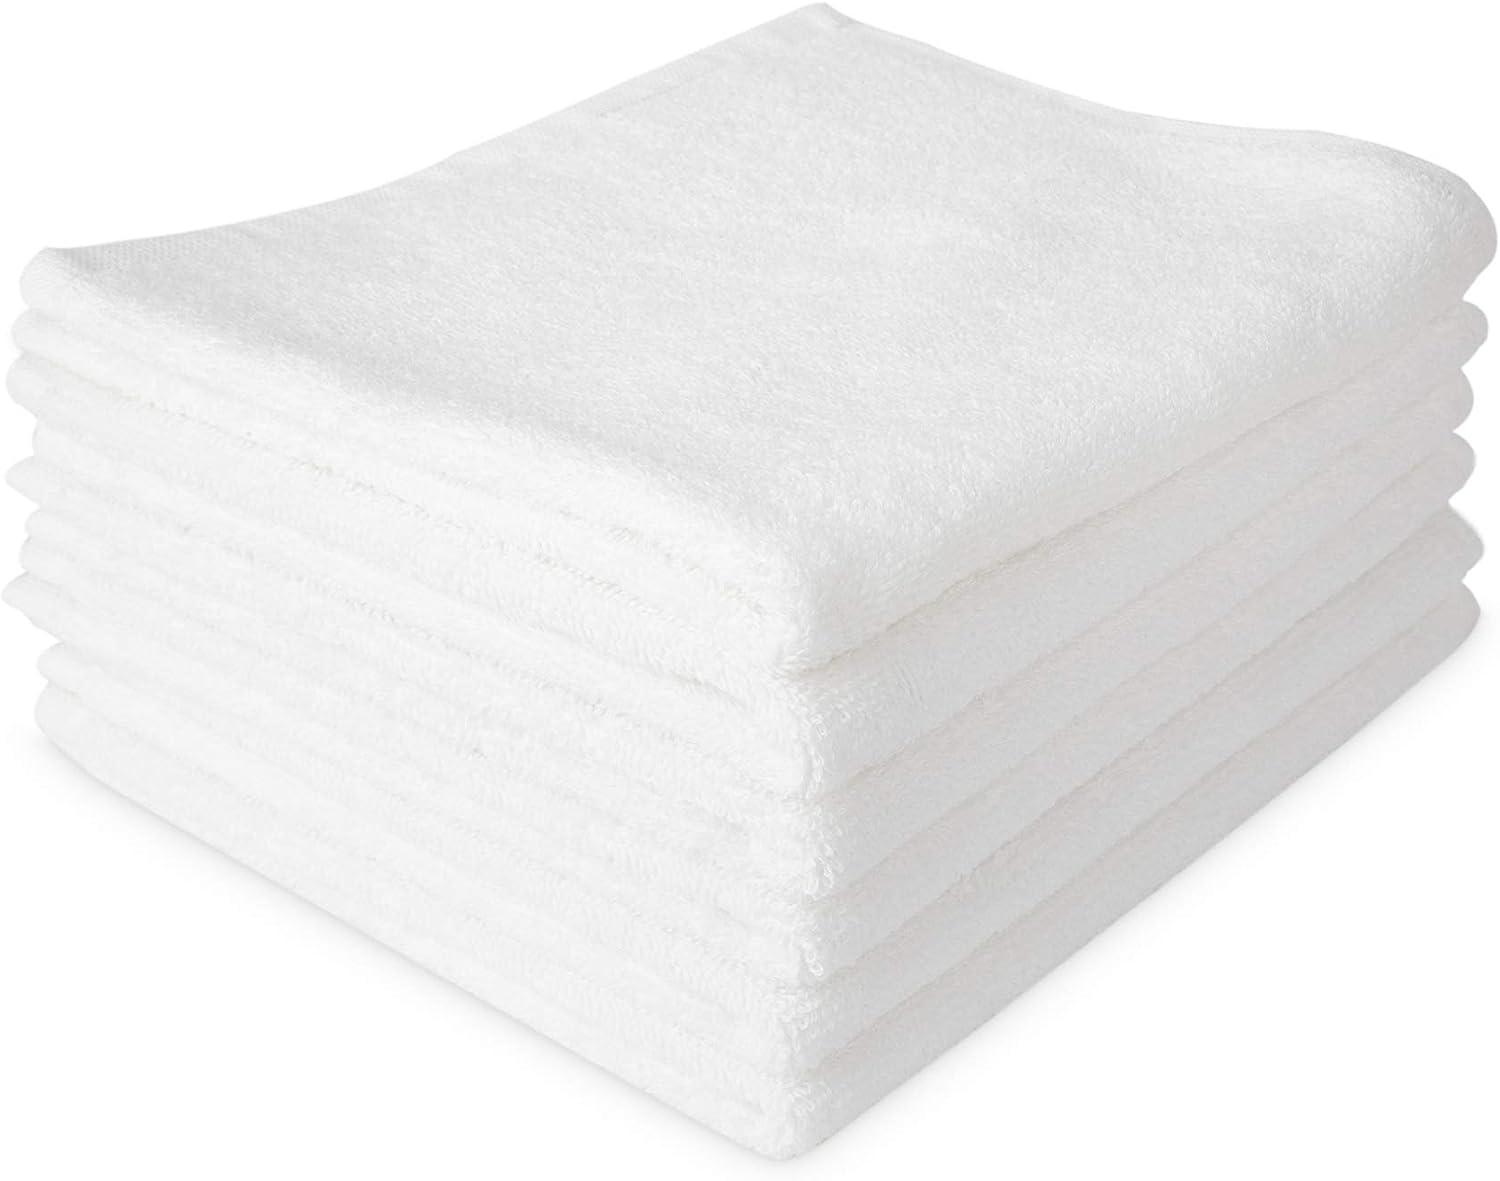 RosenSoft Oversized Wash Clothes-16x14 in Extra Large Wash Cloths for Body  and Face, Hand Gym Spa- Washcloth Towels for Bathroom, Bath Towel Set